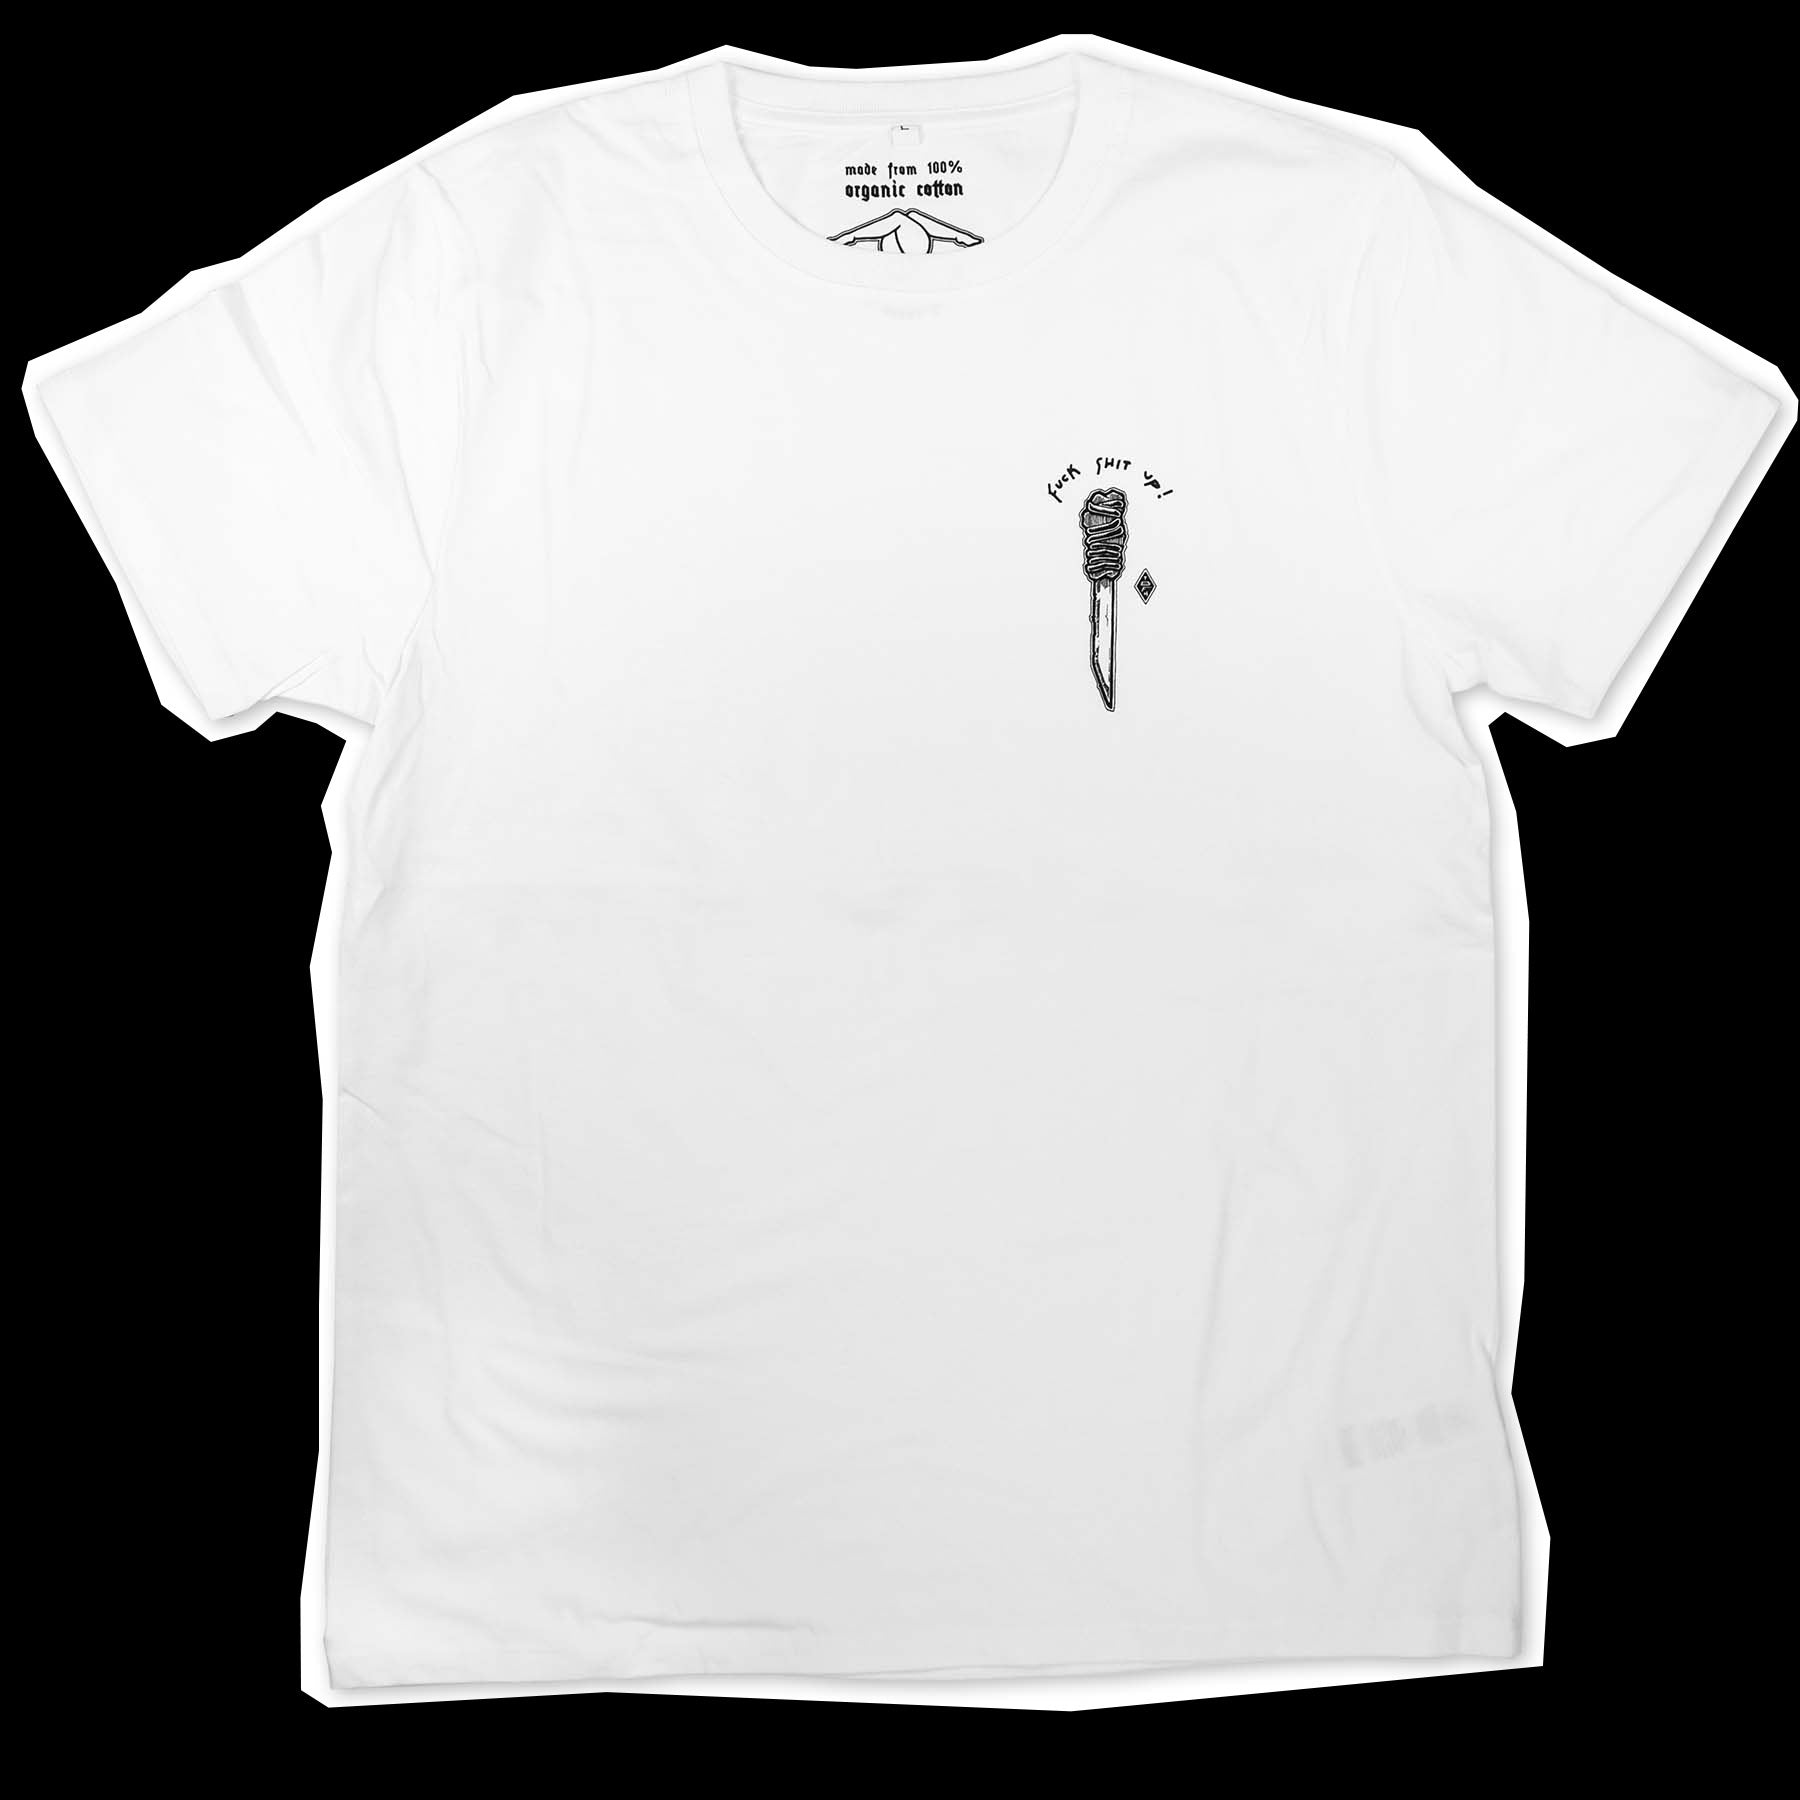 White t-shirt with a black illustration of a shiv, screen-printed on the left side chest with the text "fuck shit up"